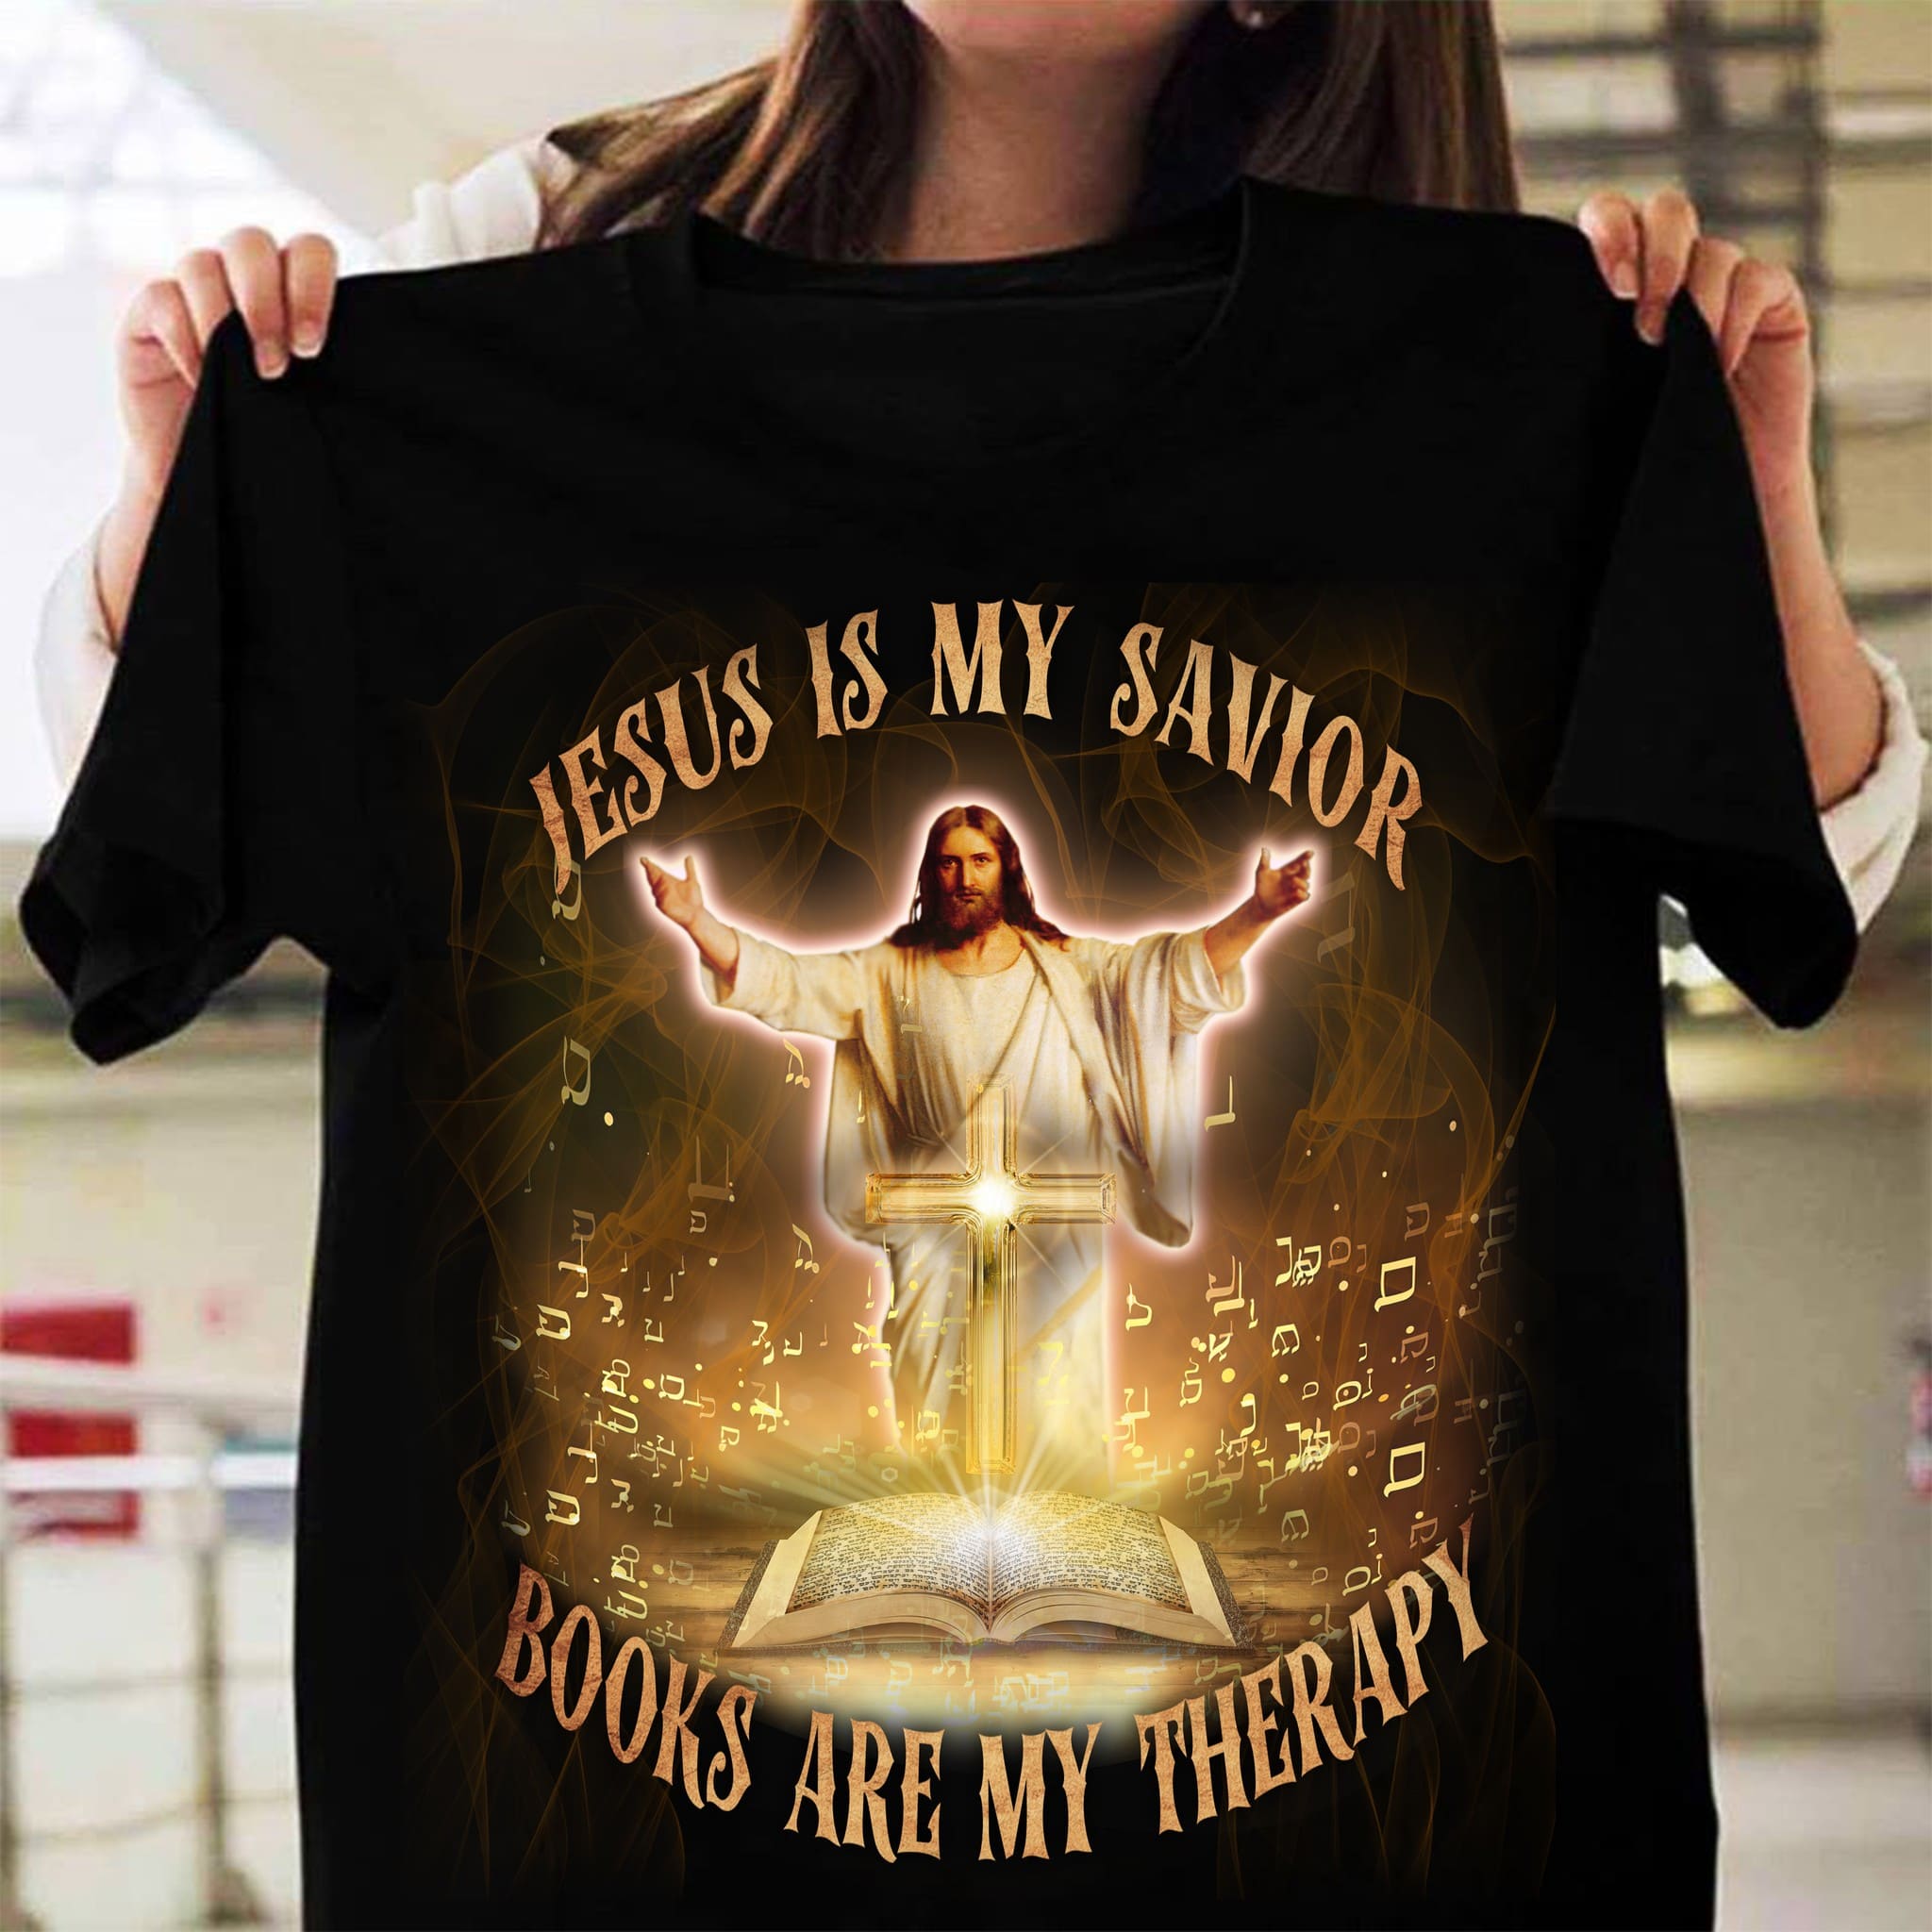 Jesus is my savior, books are my therapy - Jesus and Book, T-shirt for bookaholic